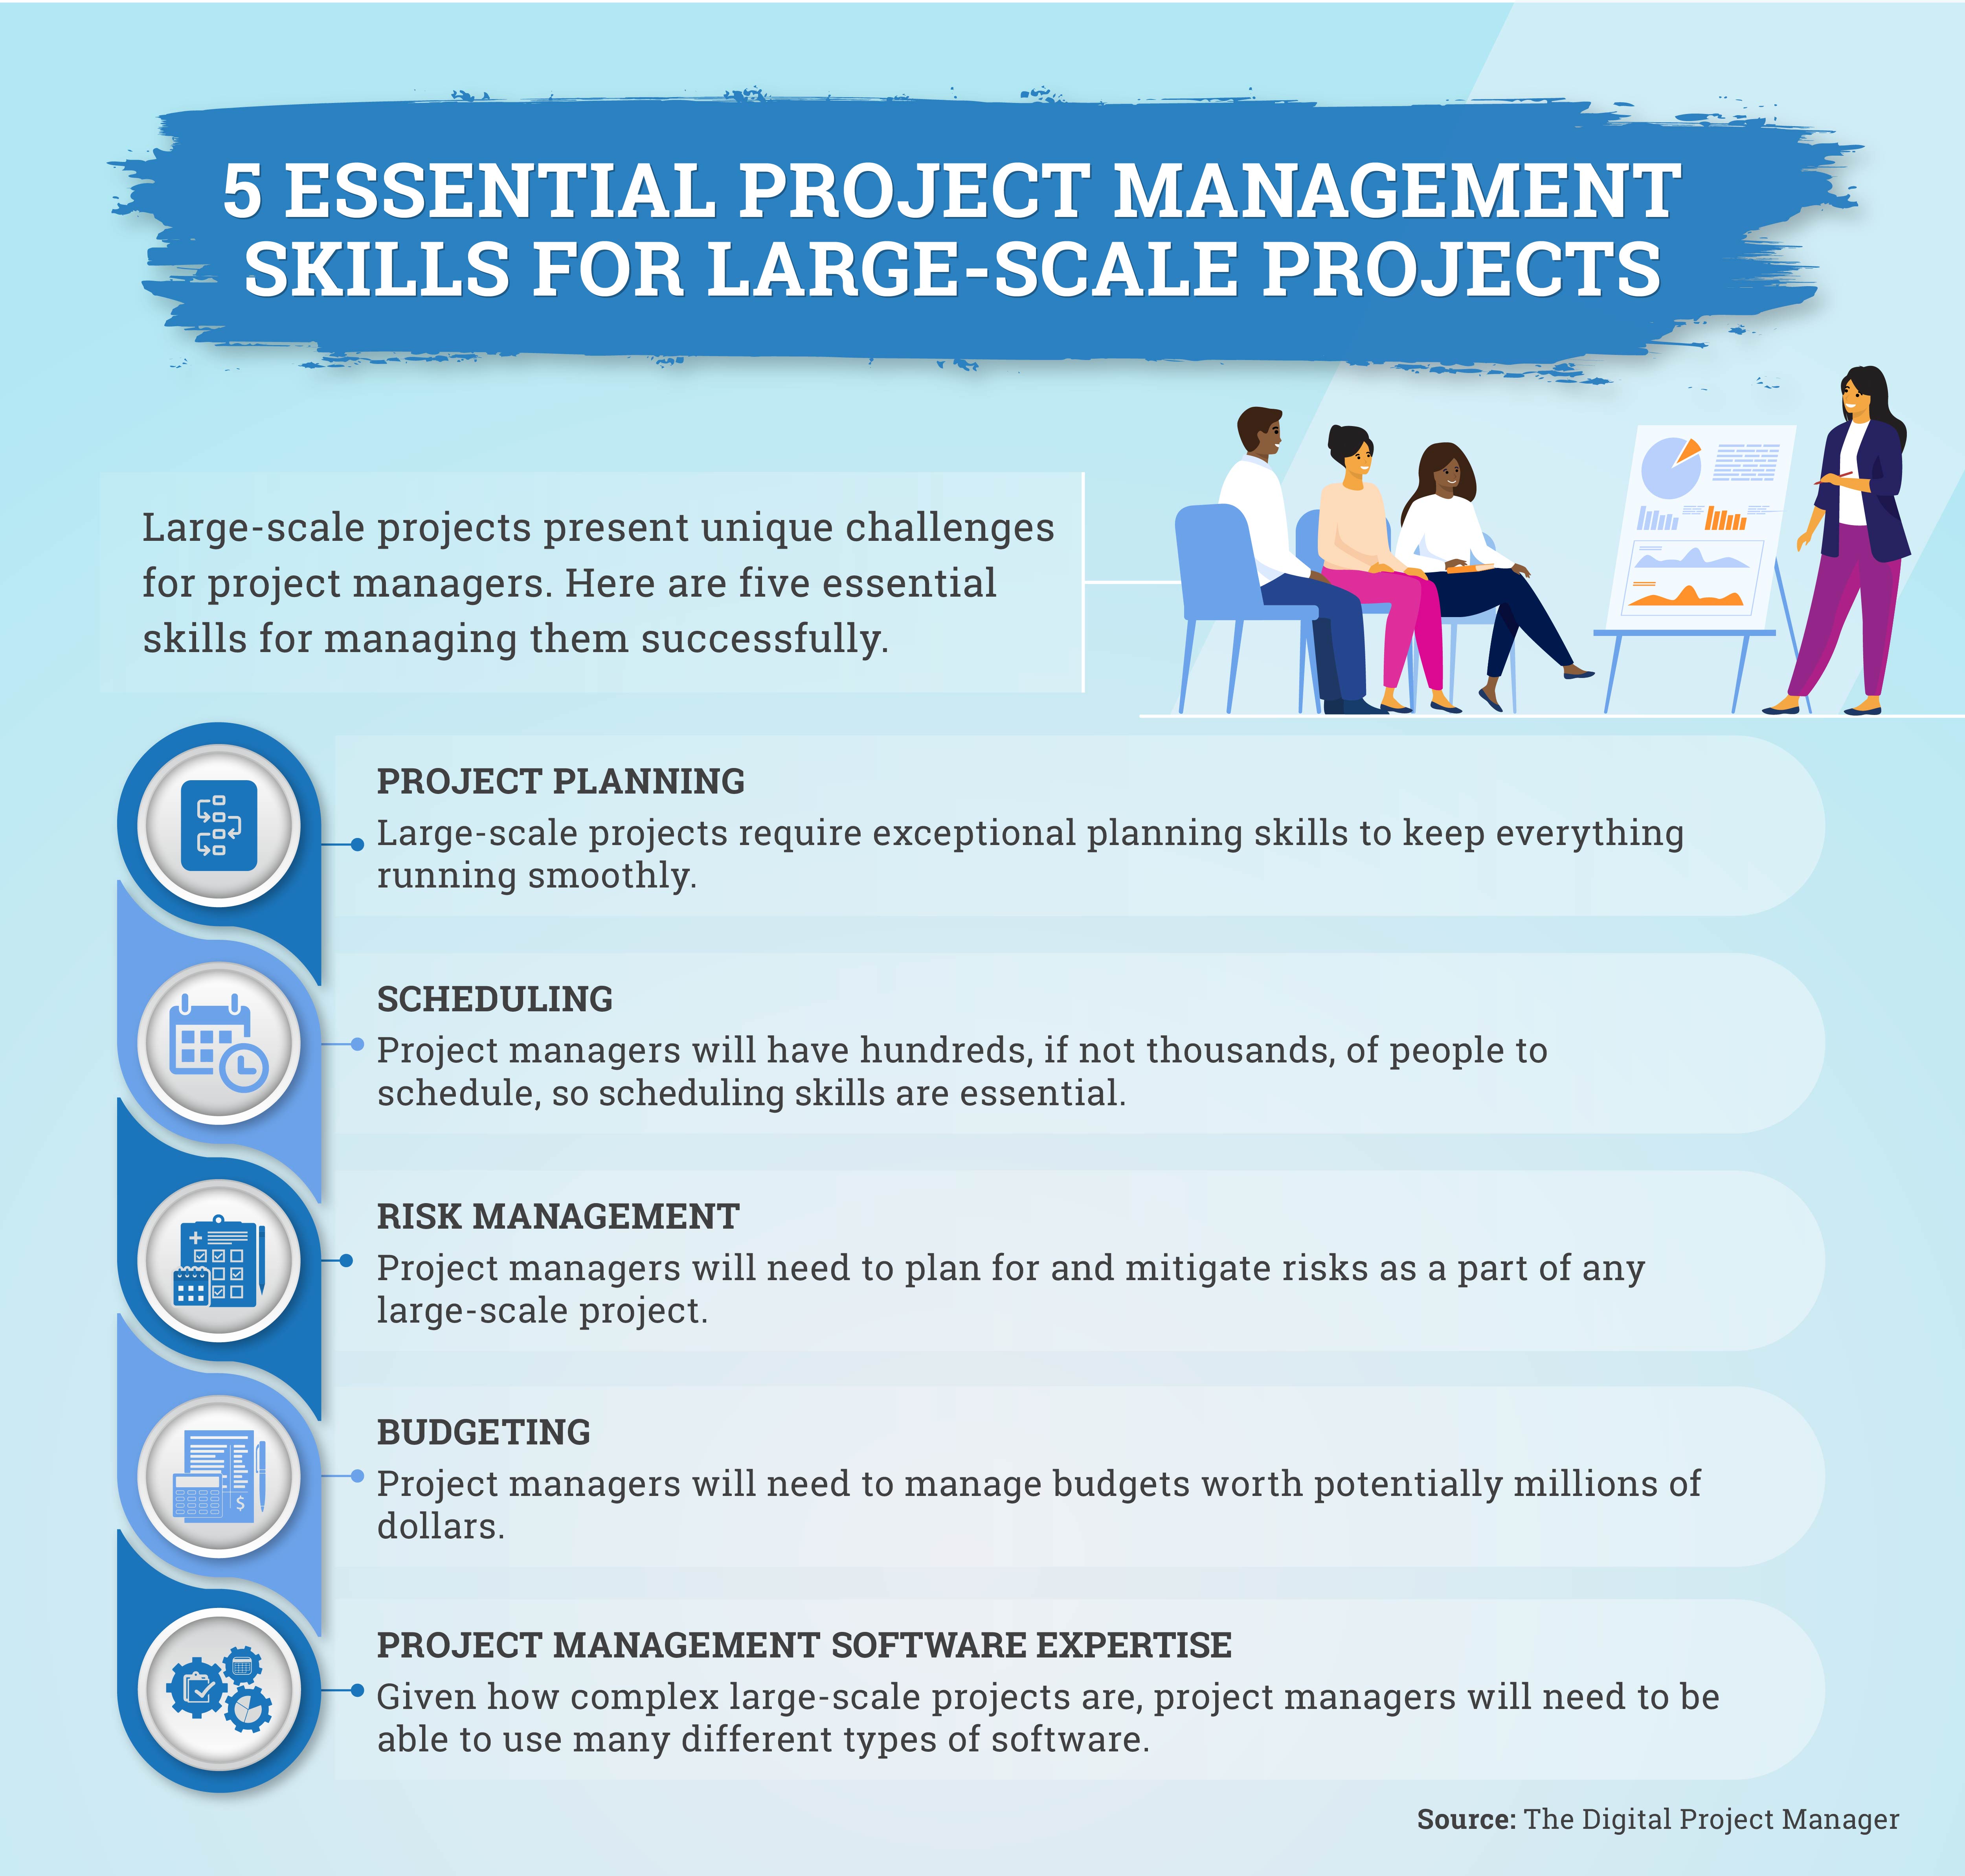 A list of five project management skills needed in large-scale projects.